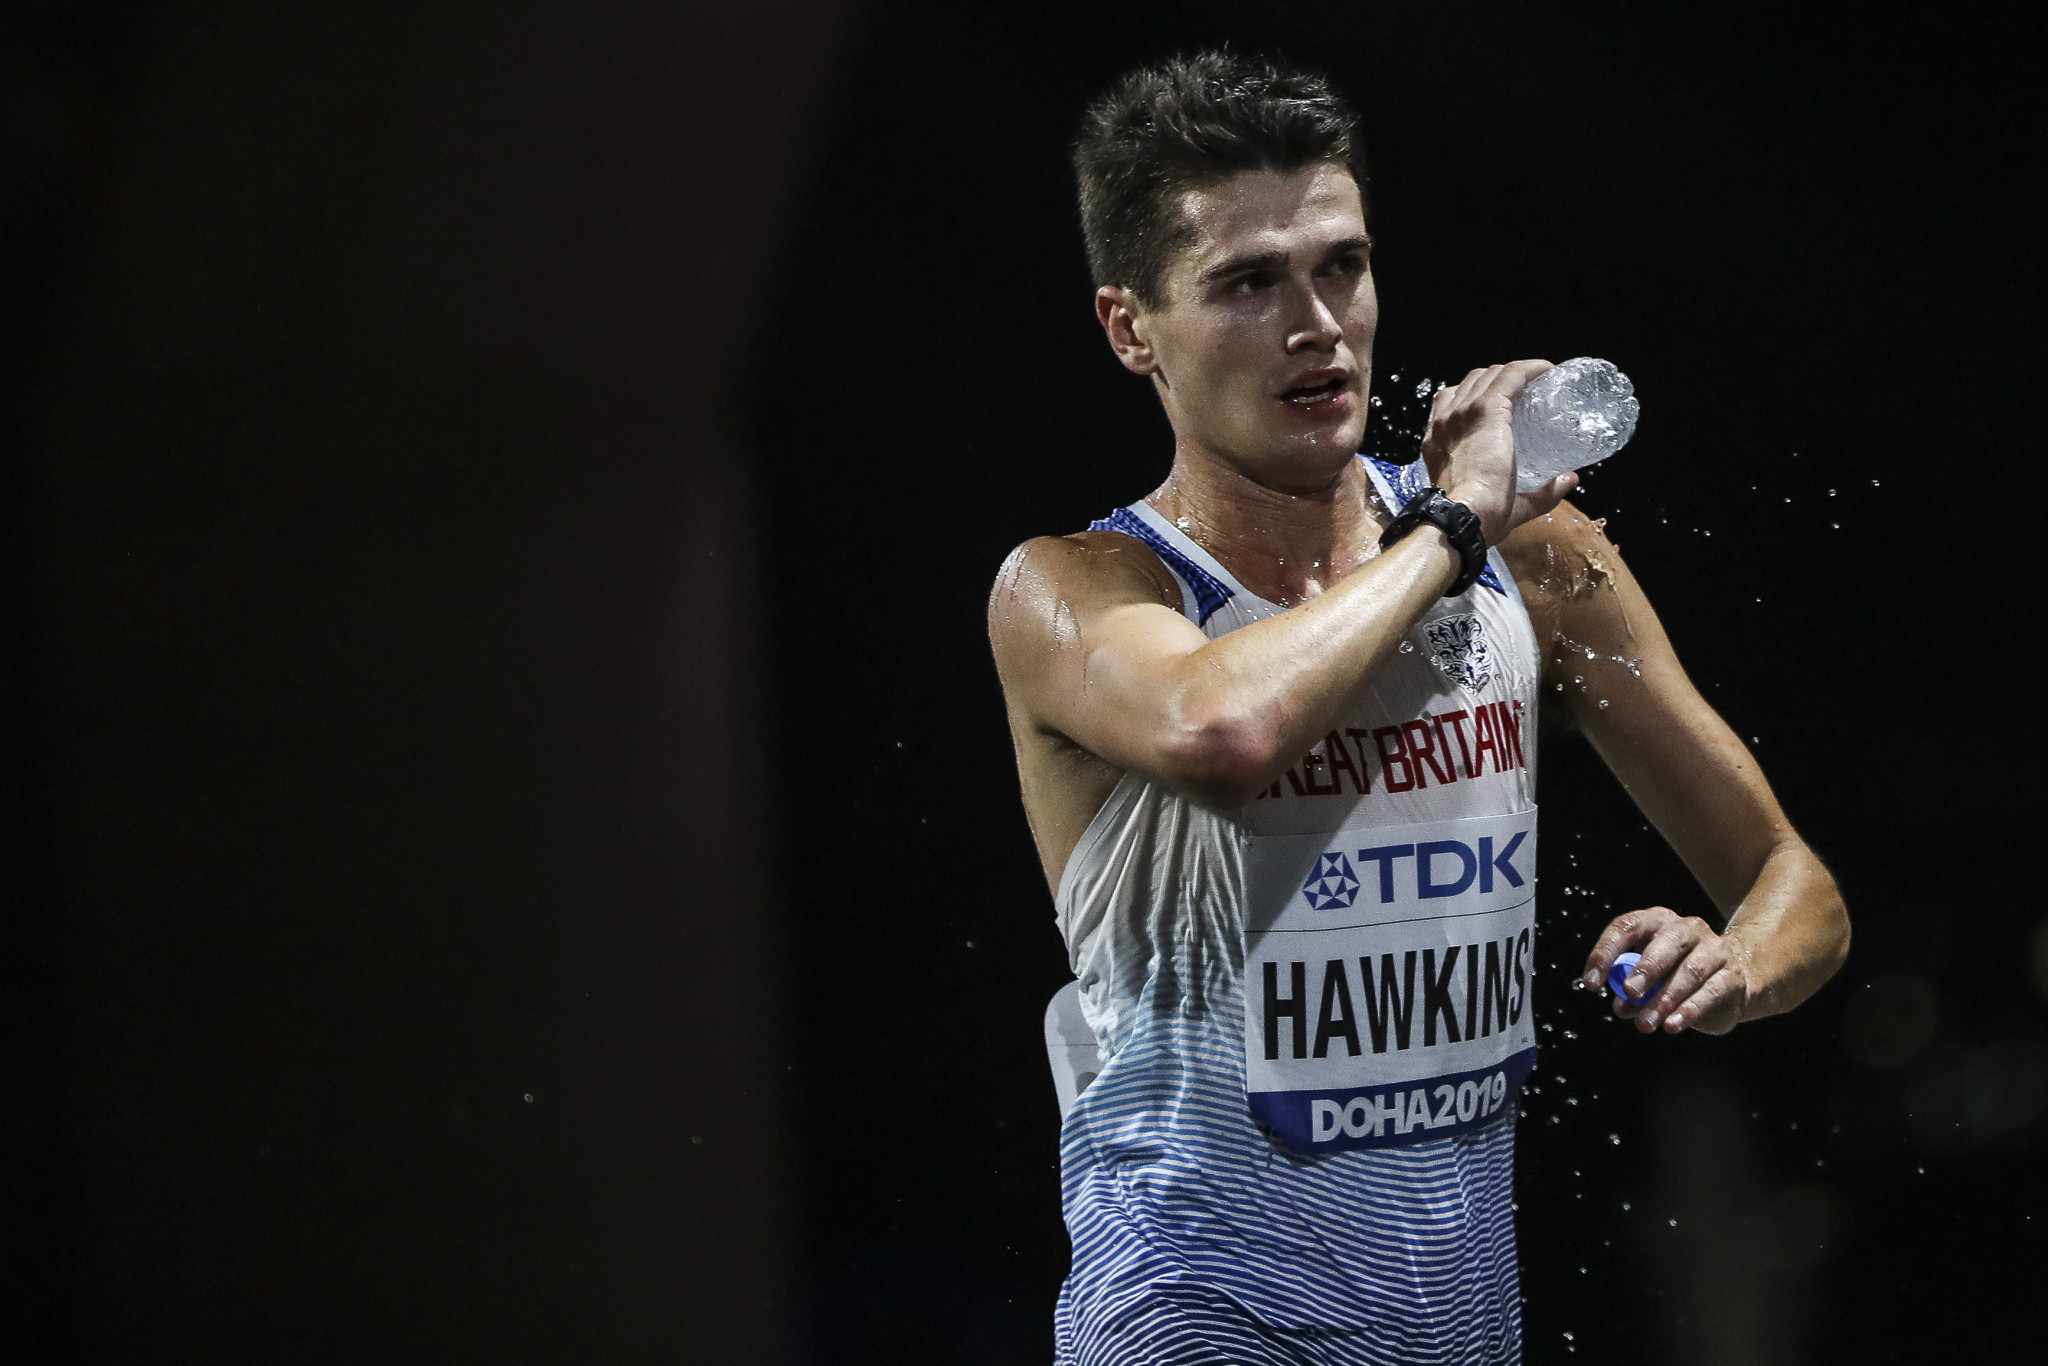 Hawkins and Thompson officially selected for British Athletics Tokyo 2020 team